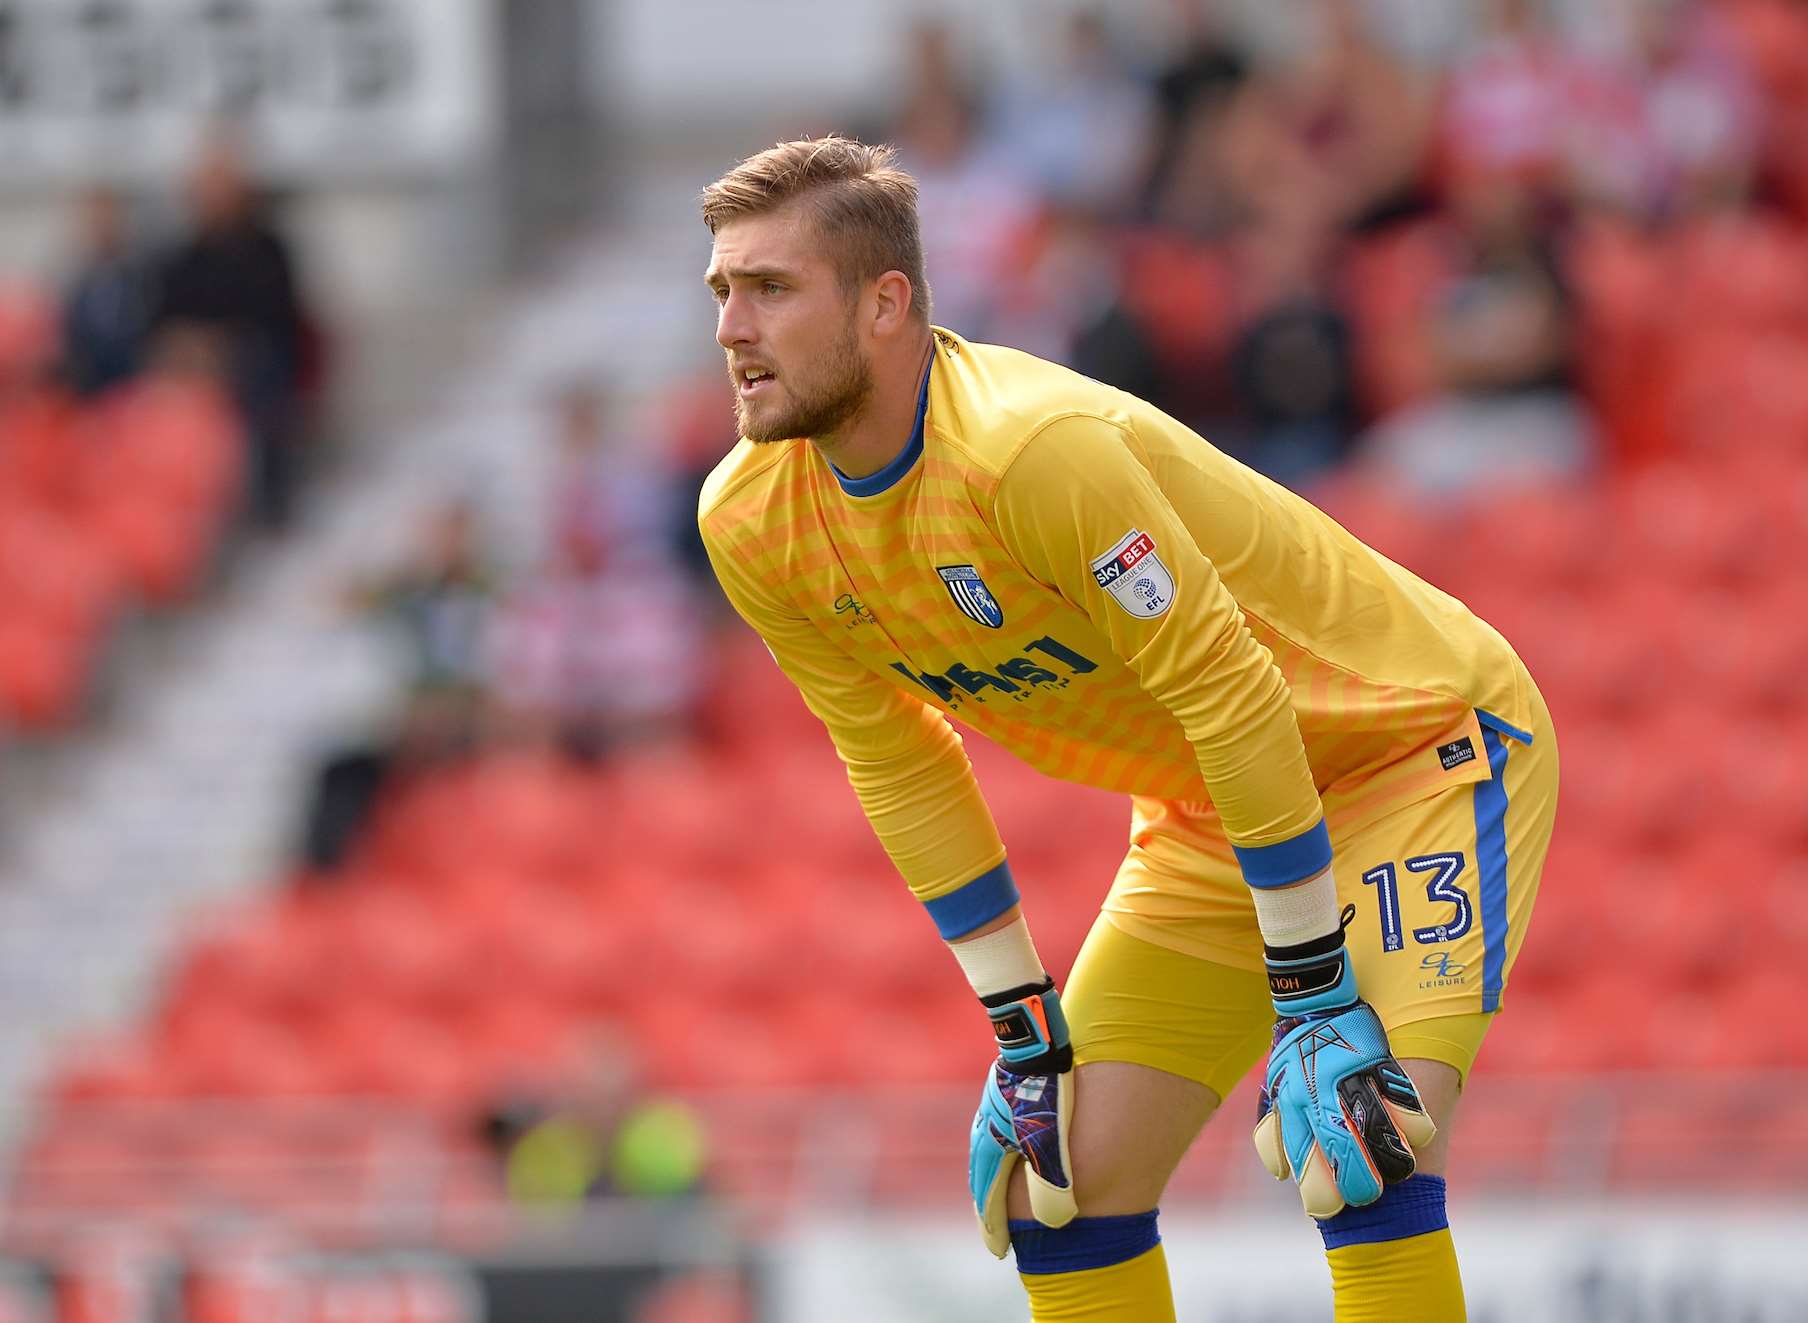 Tomas Holy kept a clean sheet for Gillingham at Doncaster Picture: Ady Kerry